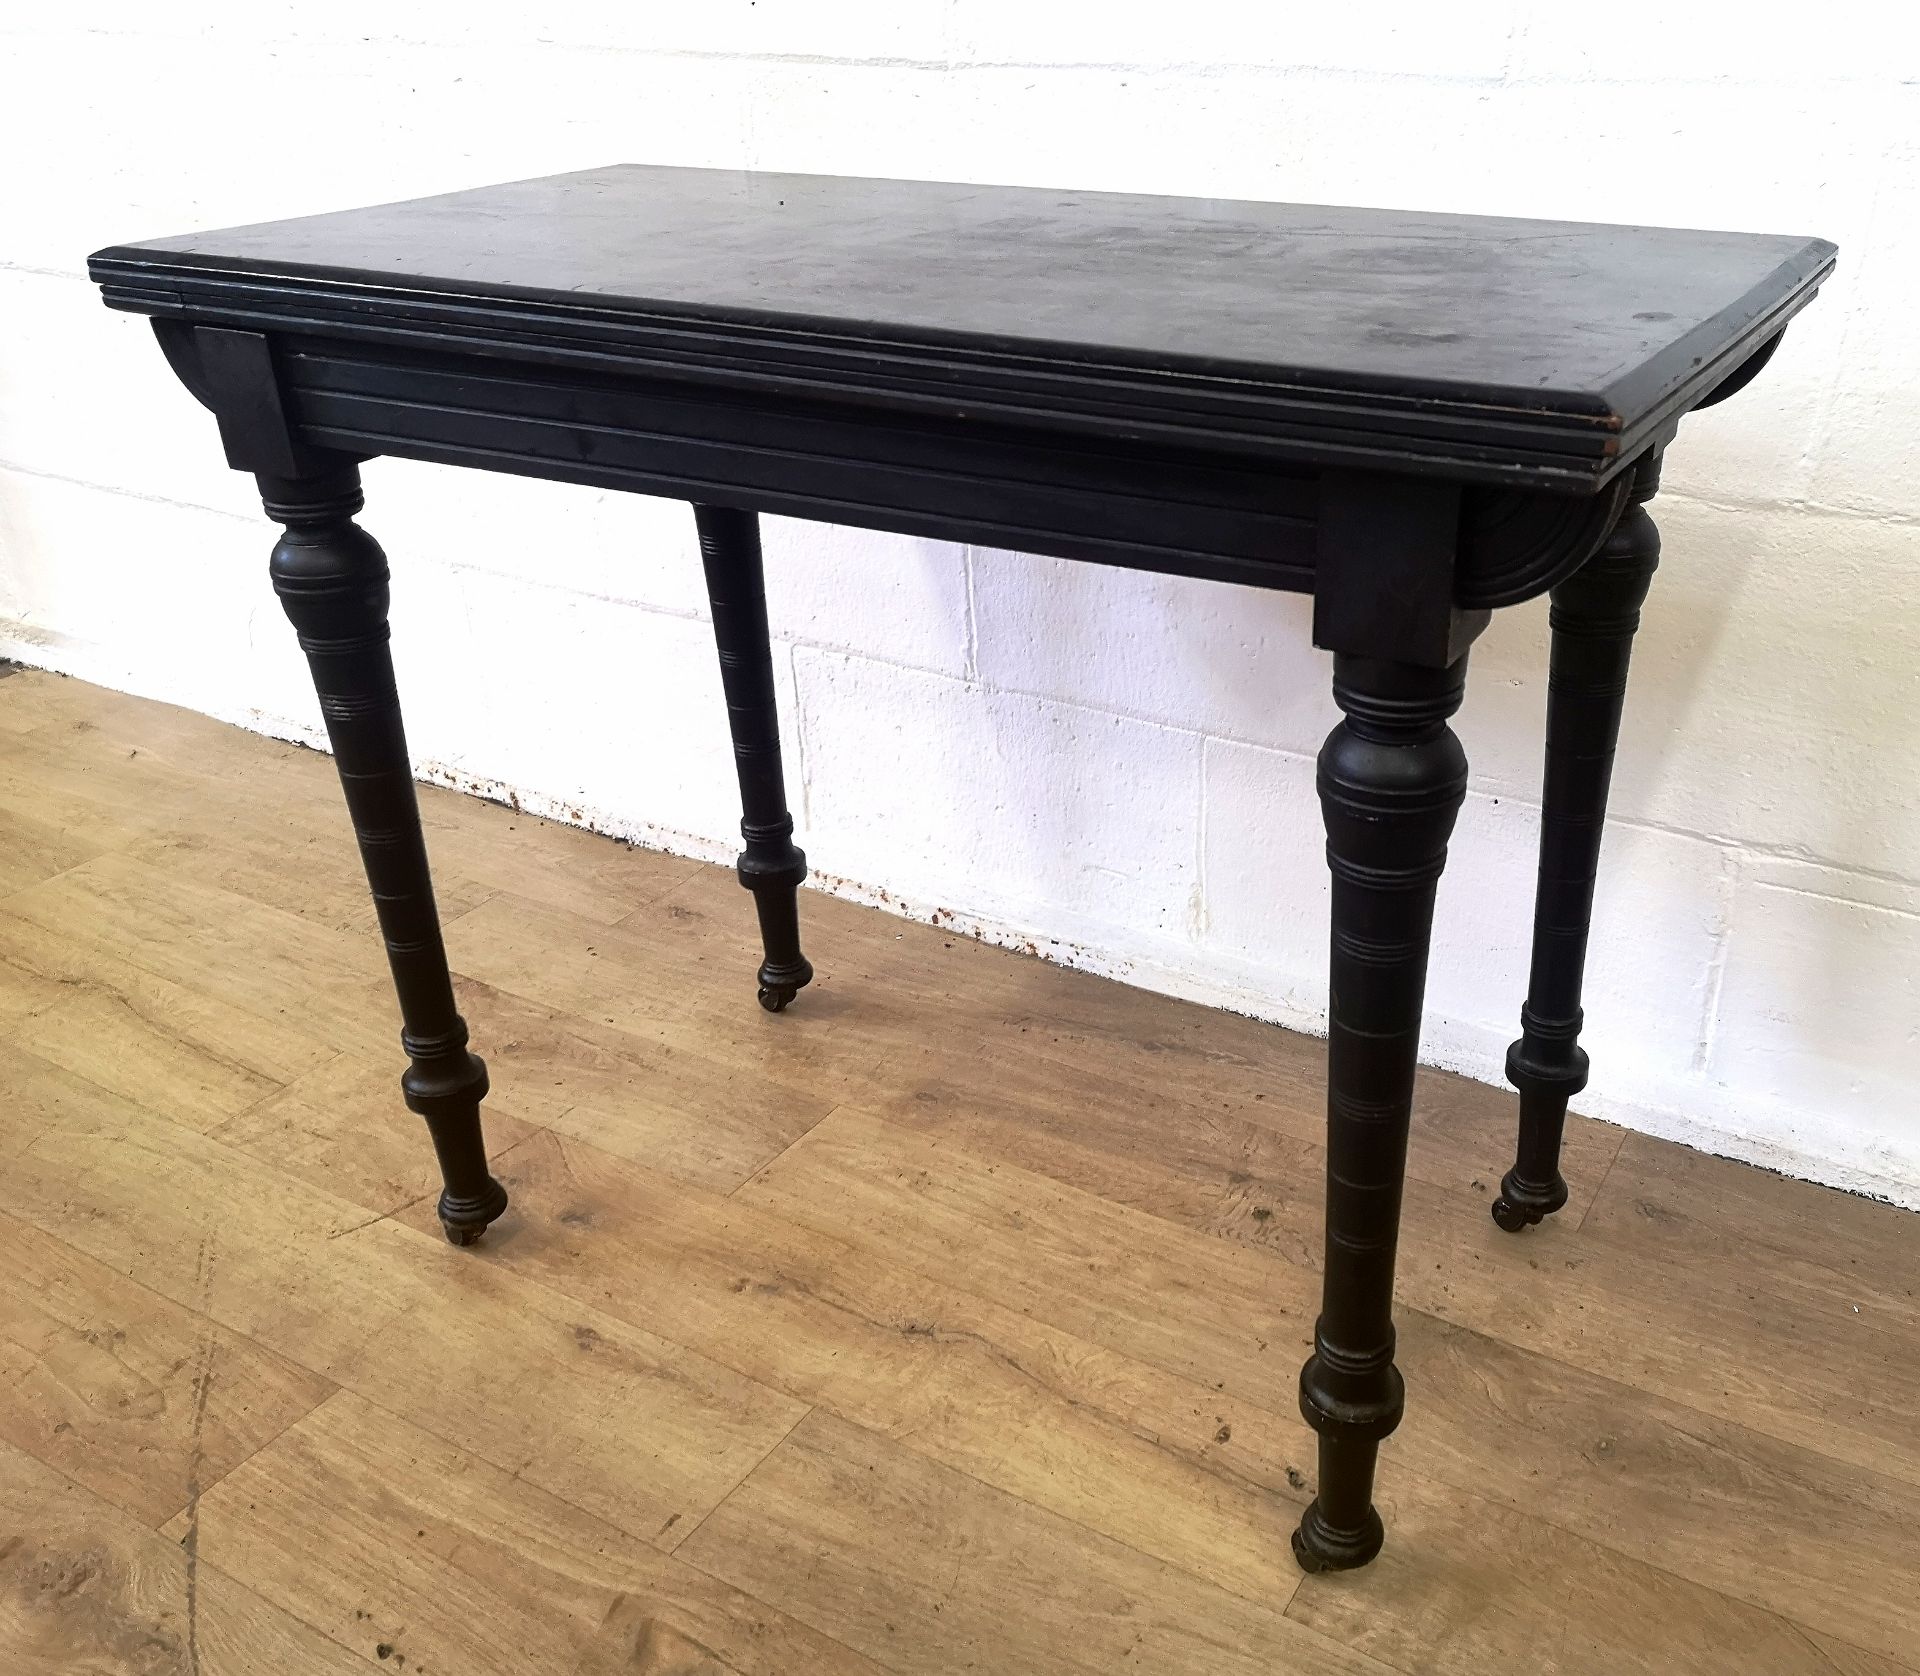 Black painted games table - Image 2 of 6